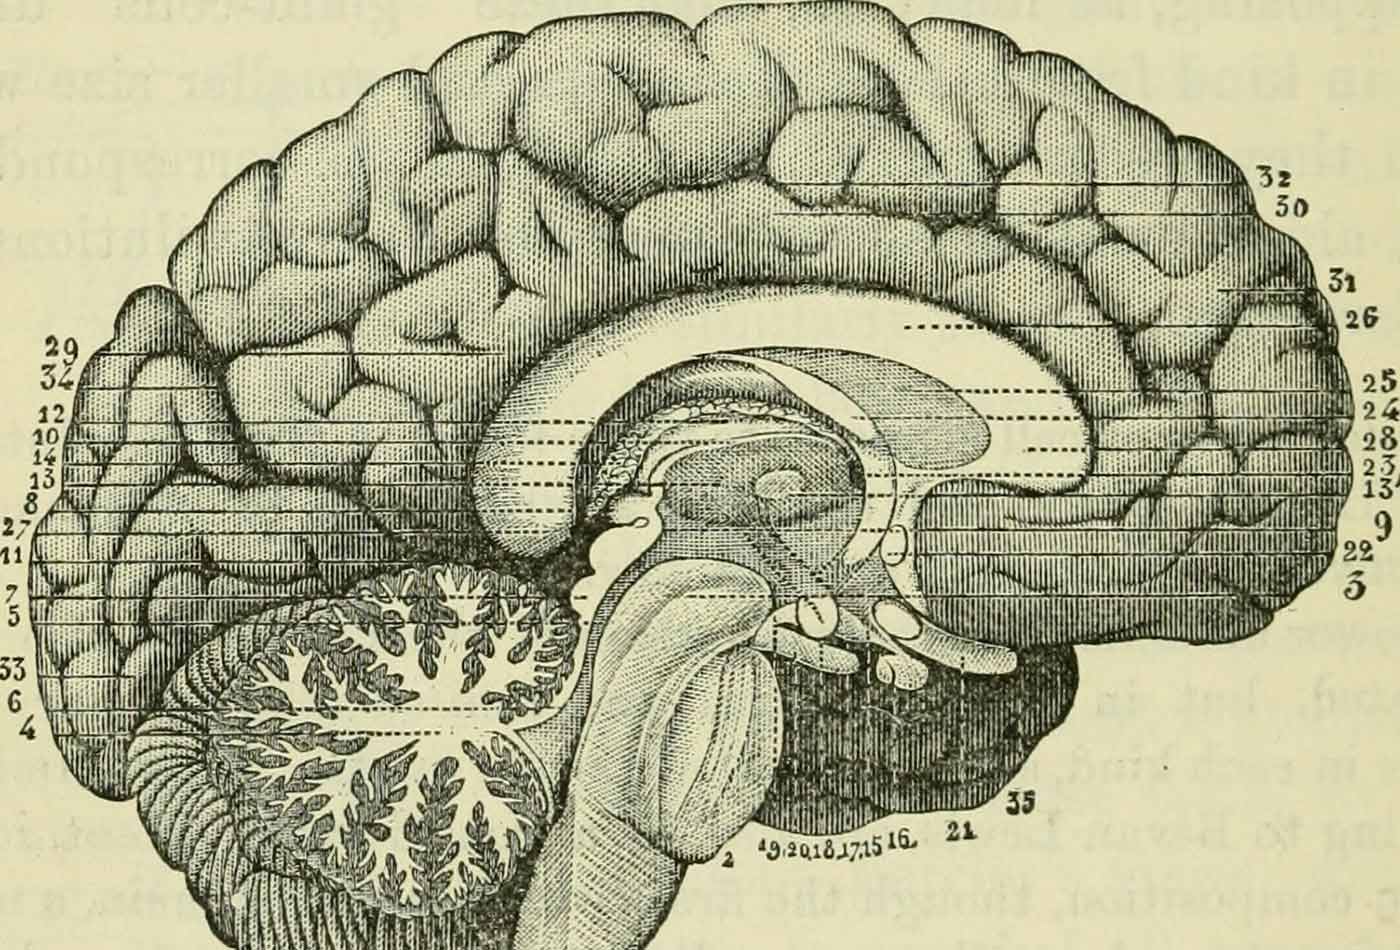 Image from page 469 of "The brain as an organ of mind" (1896).